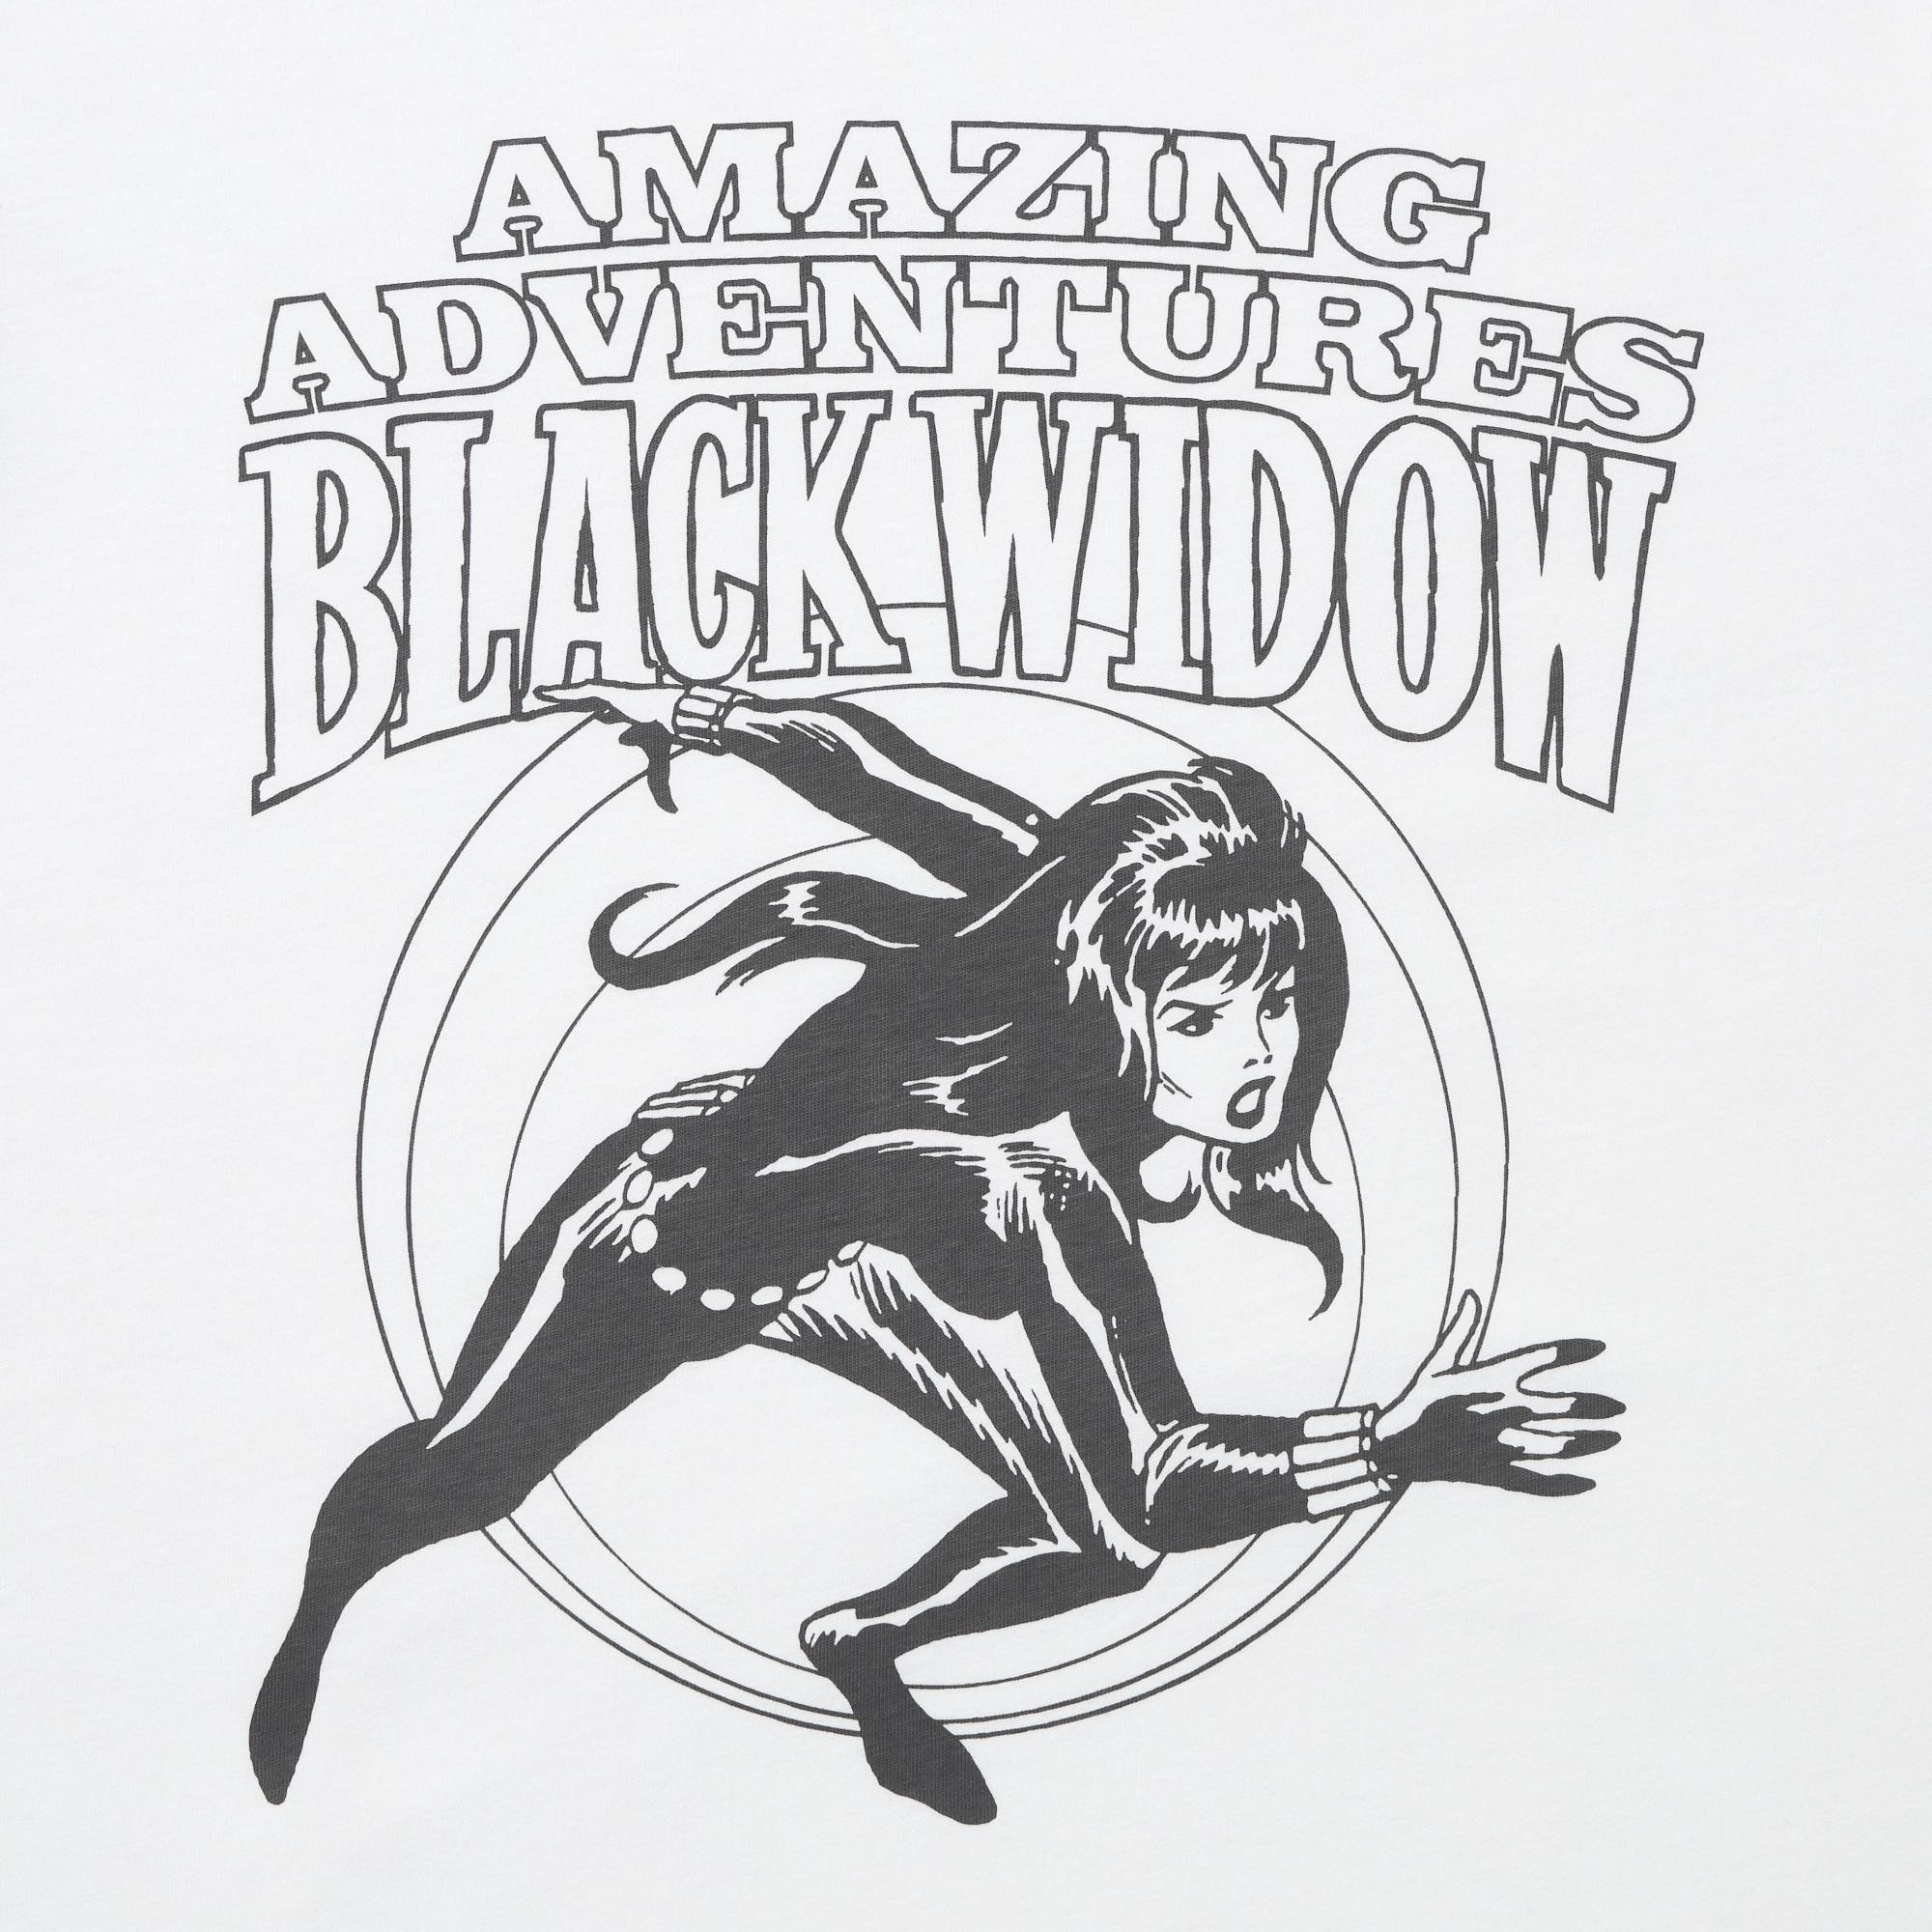 MAGIC FOR ALL FOREVER UT (Short-Sleeve Graphic T-Shirt) (Black Widow)